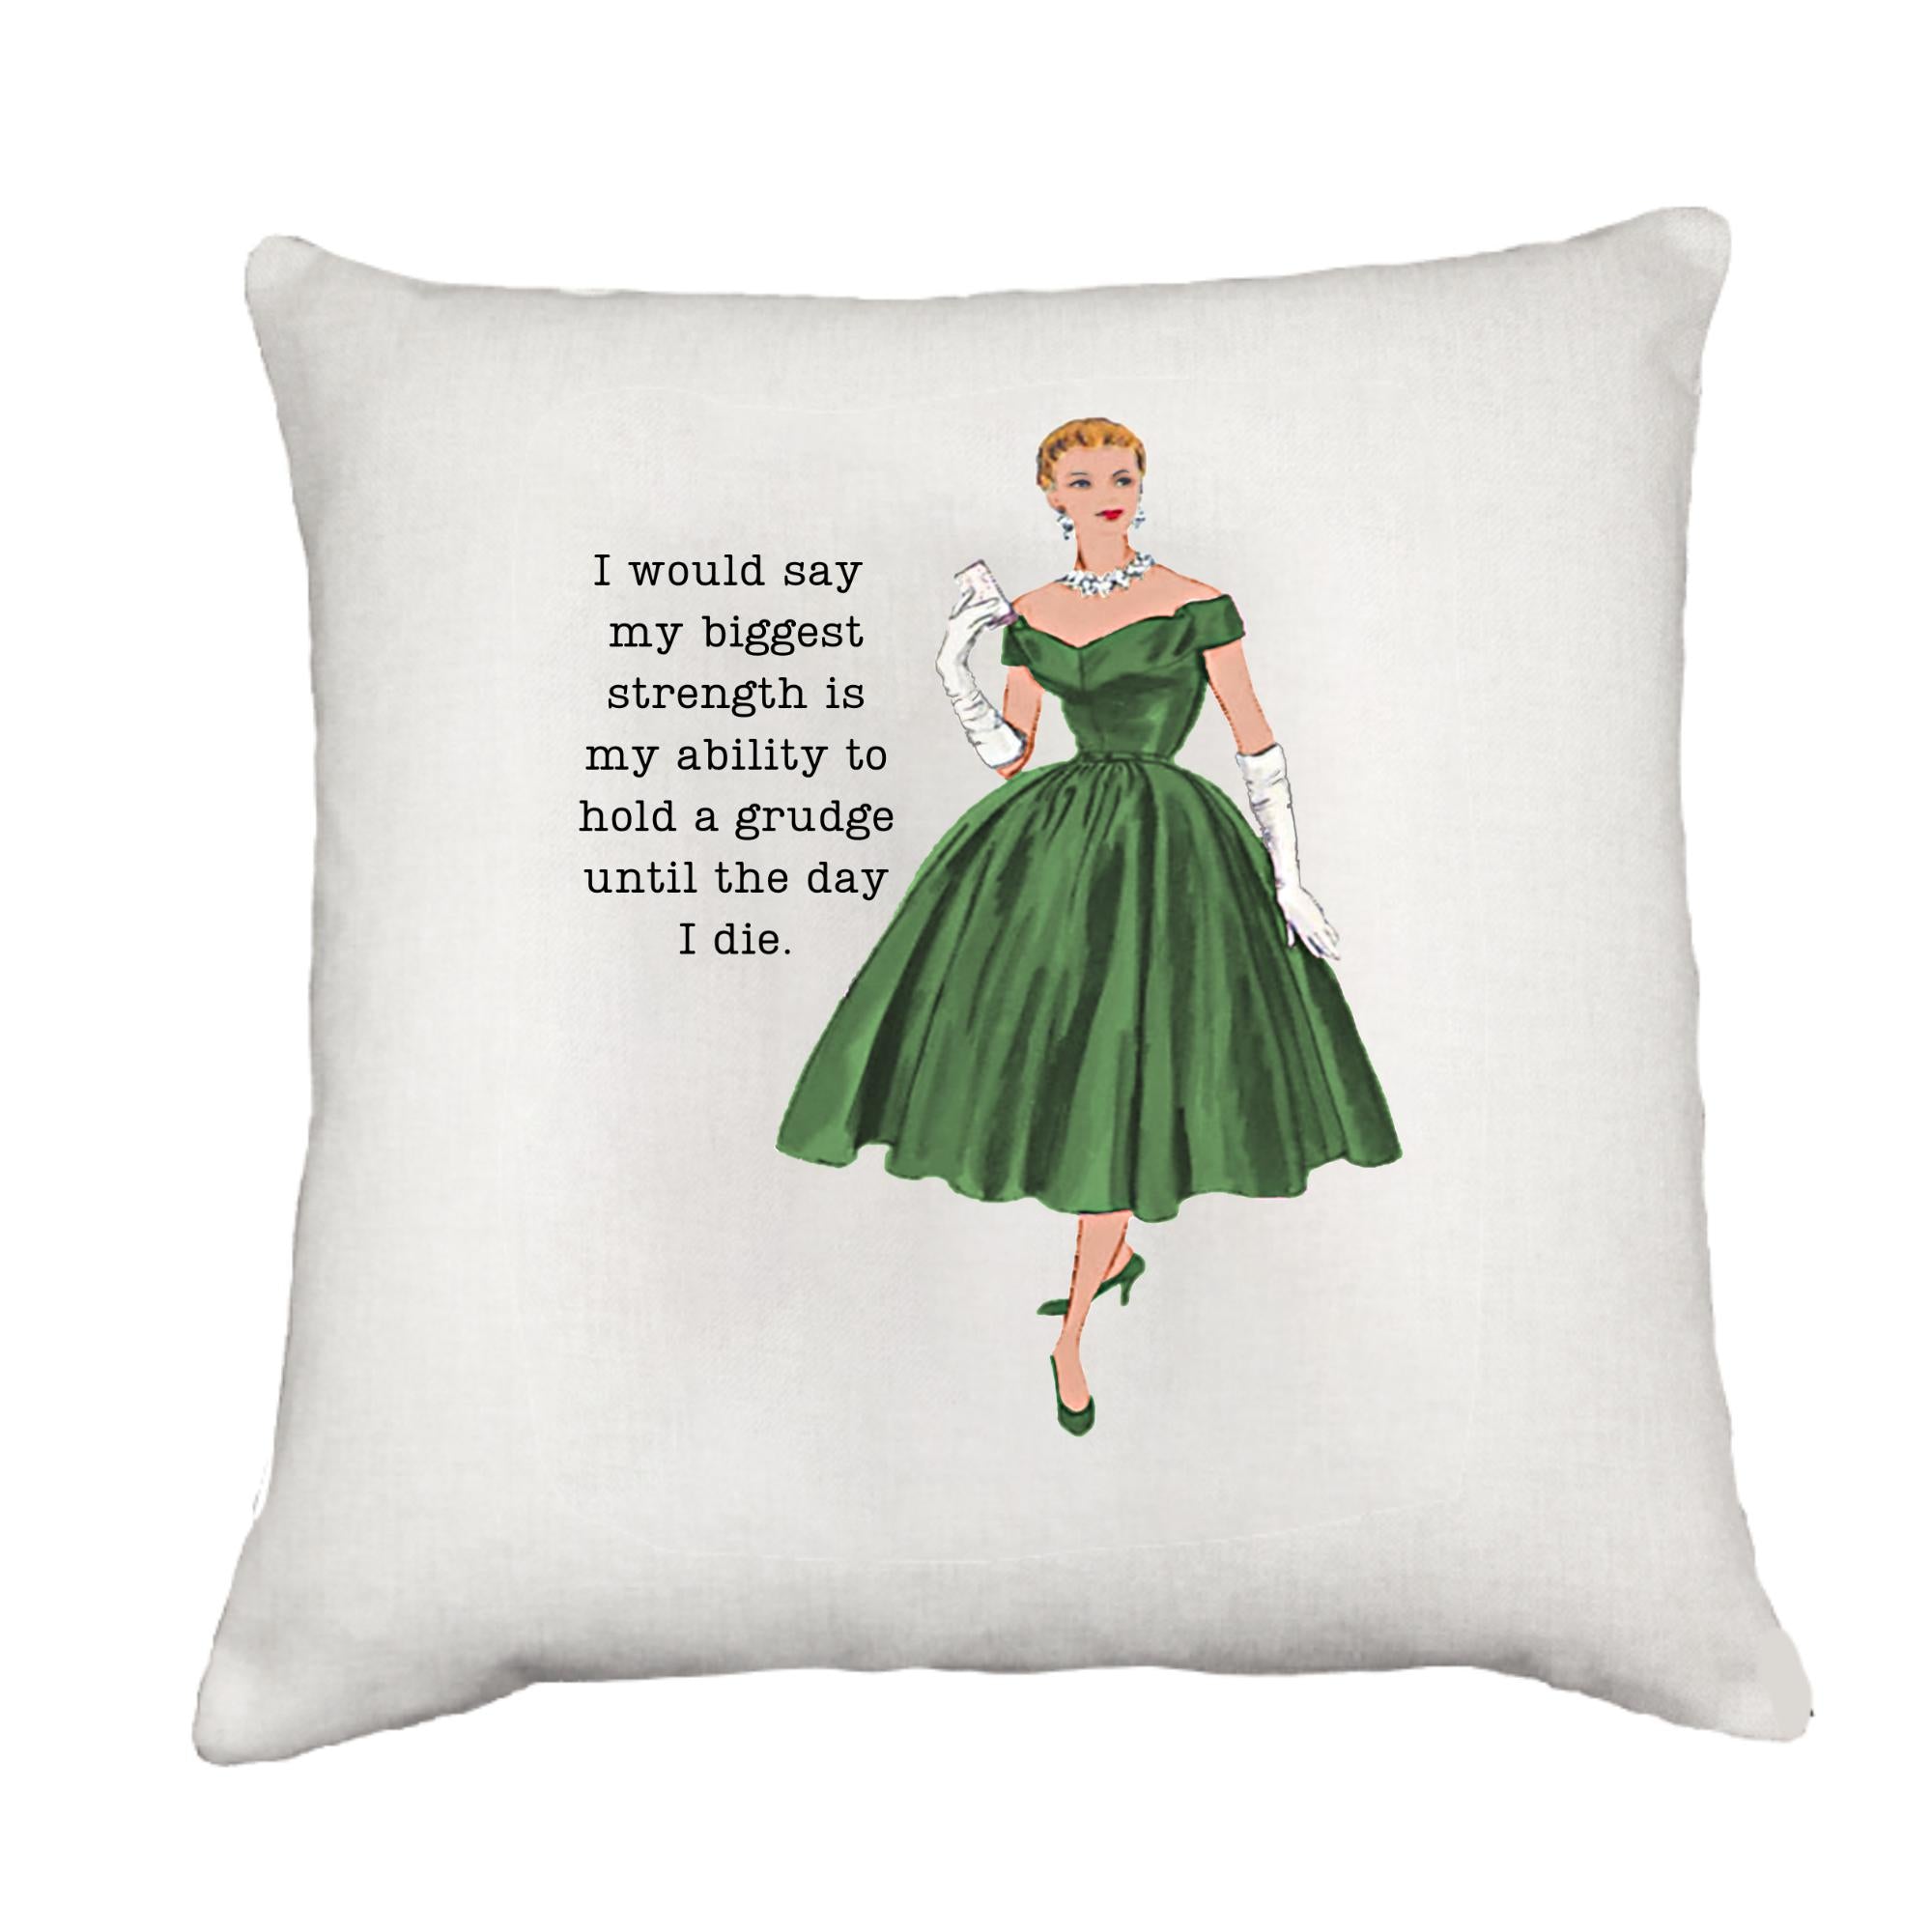 Hold A Grudge Cottage Pillow Throw/Decorative Pillow - Southern Sisters